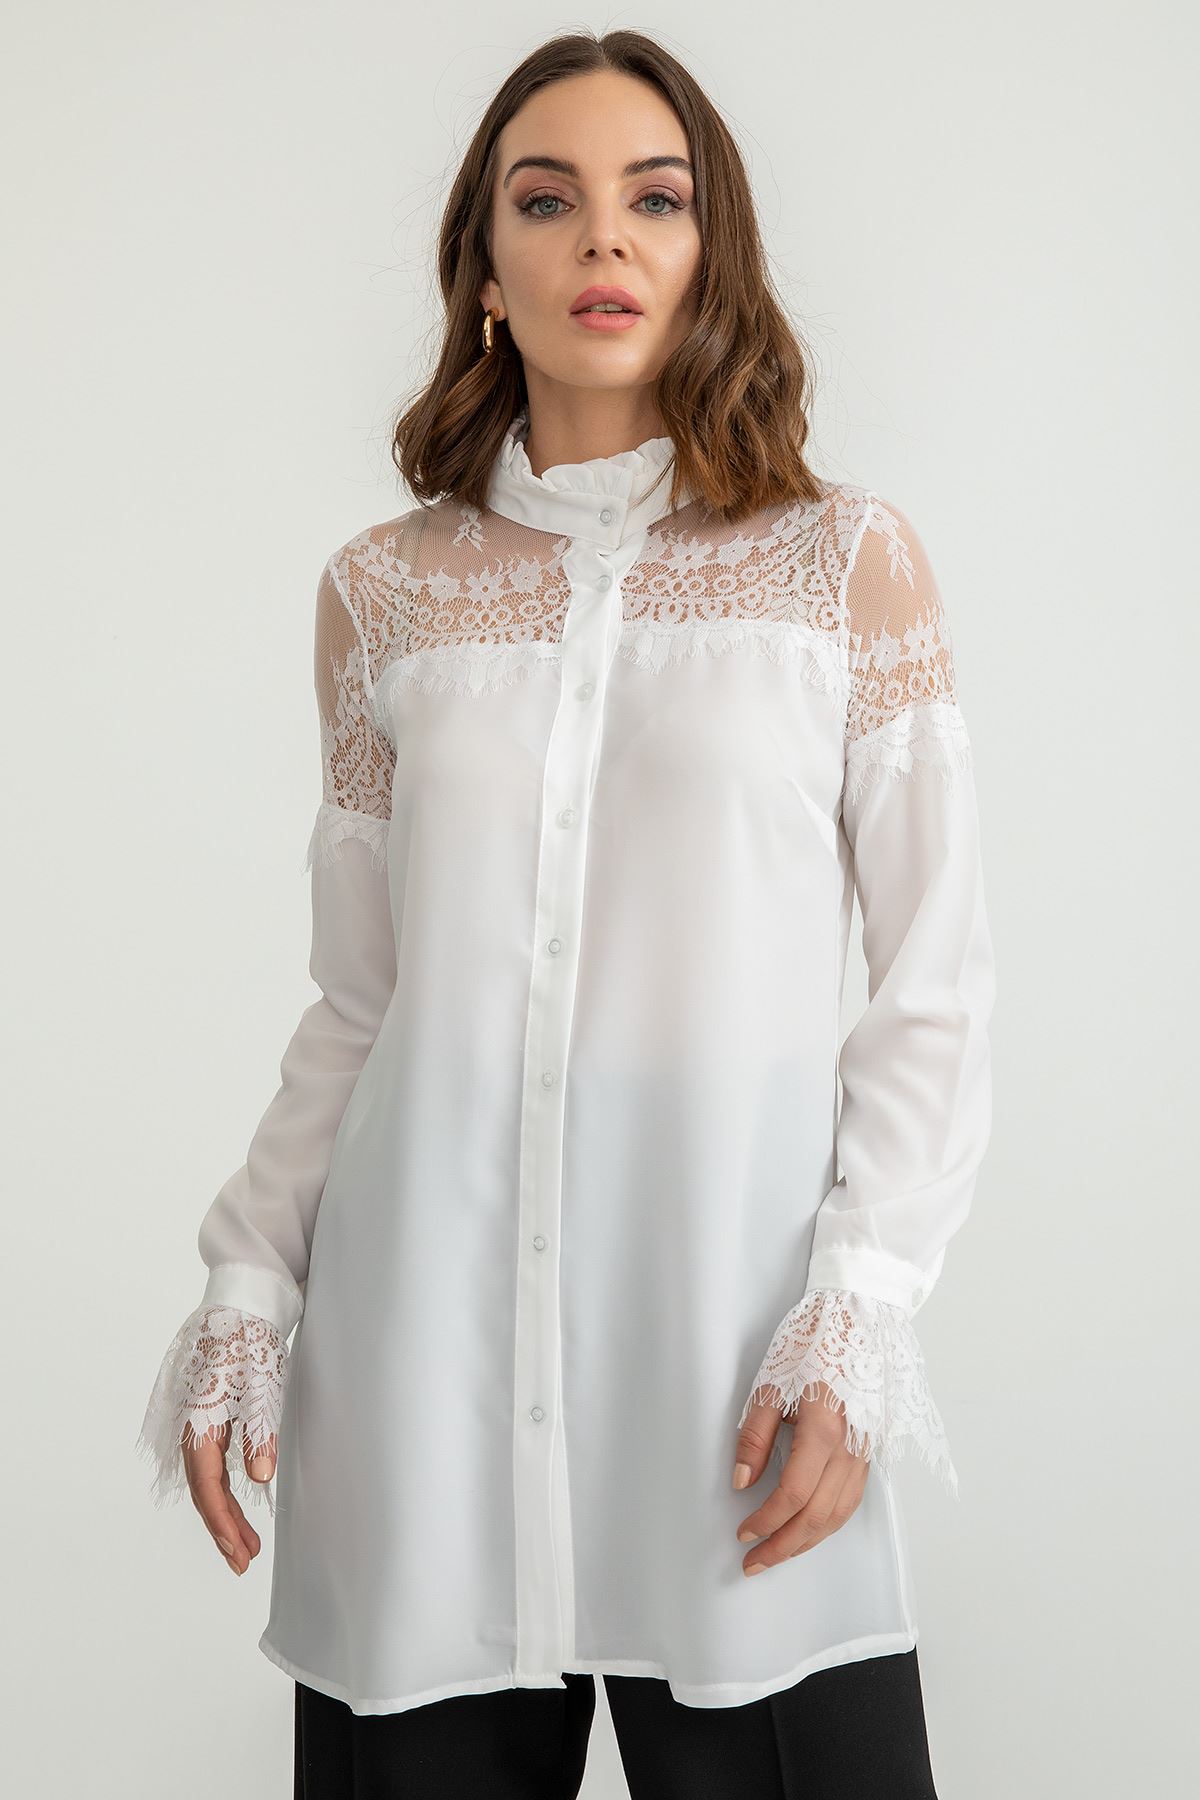 Jesica Fabric Ruffled Neck Laced Shoulders And Sleeves Women Tunic - Ecru